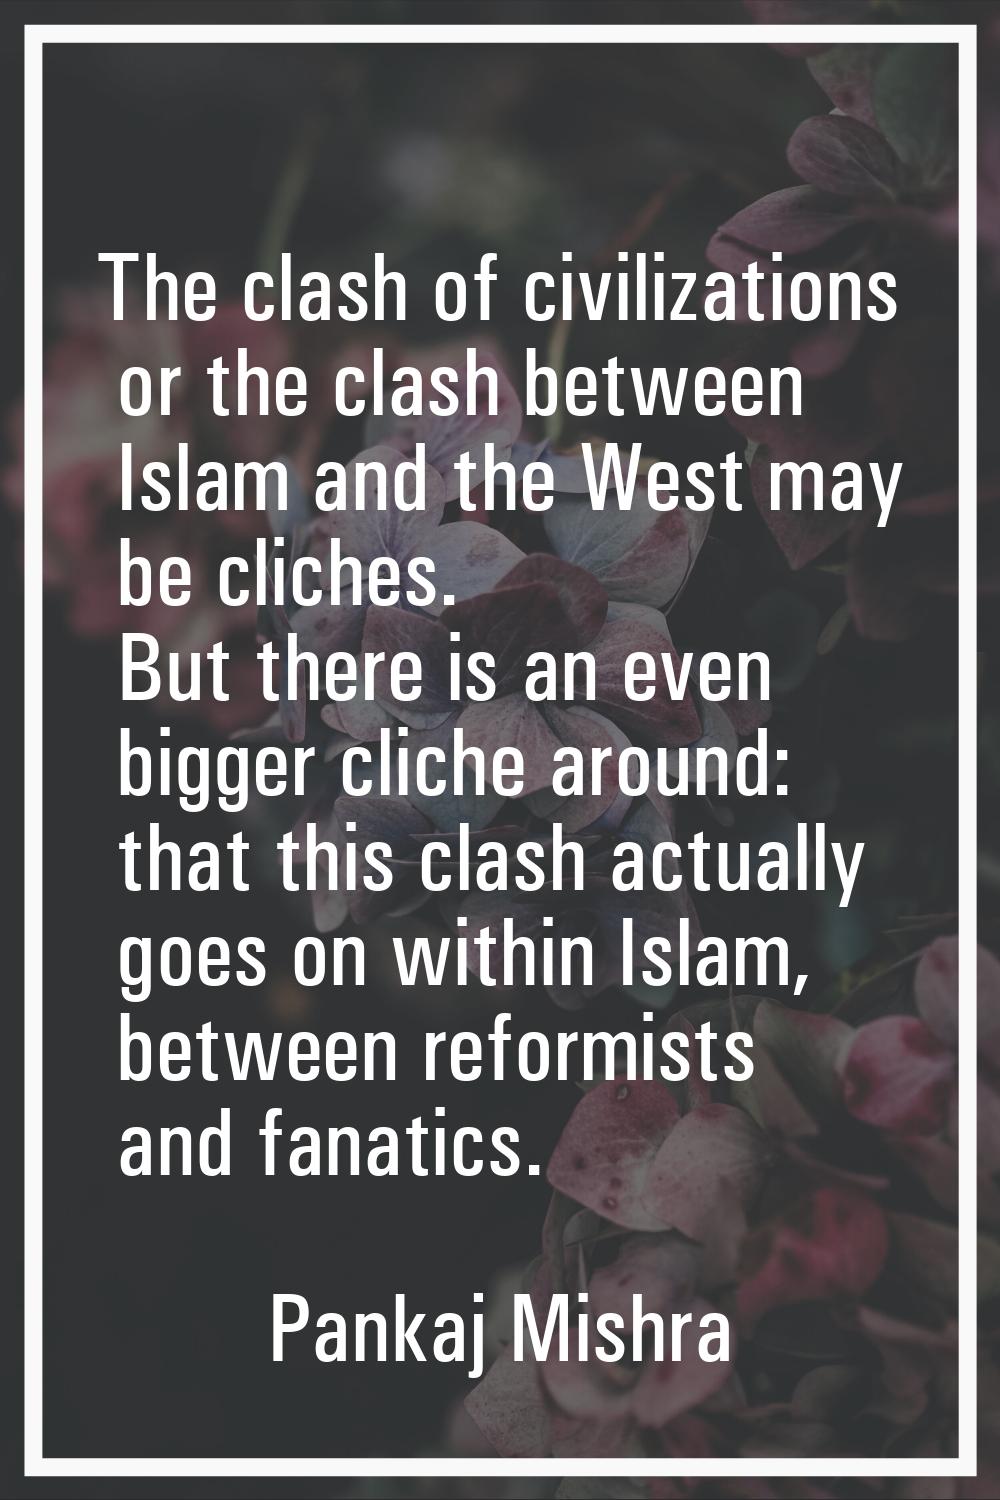 The clash of civilizations or the clash between Islam and the West may be cliches. But there is an 